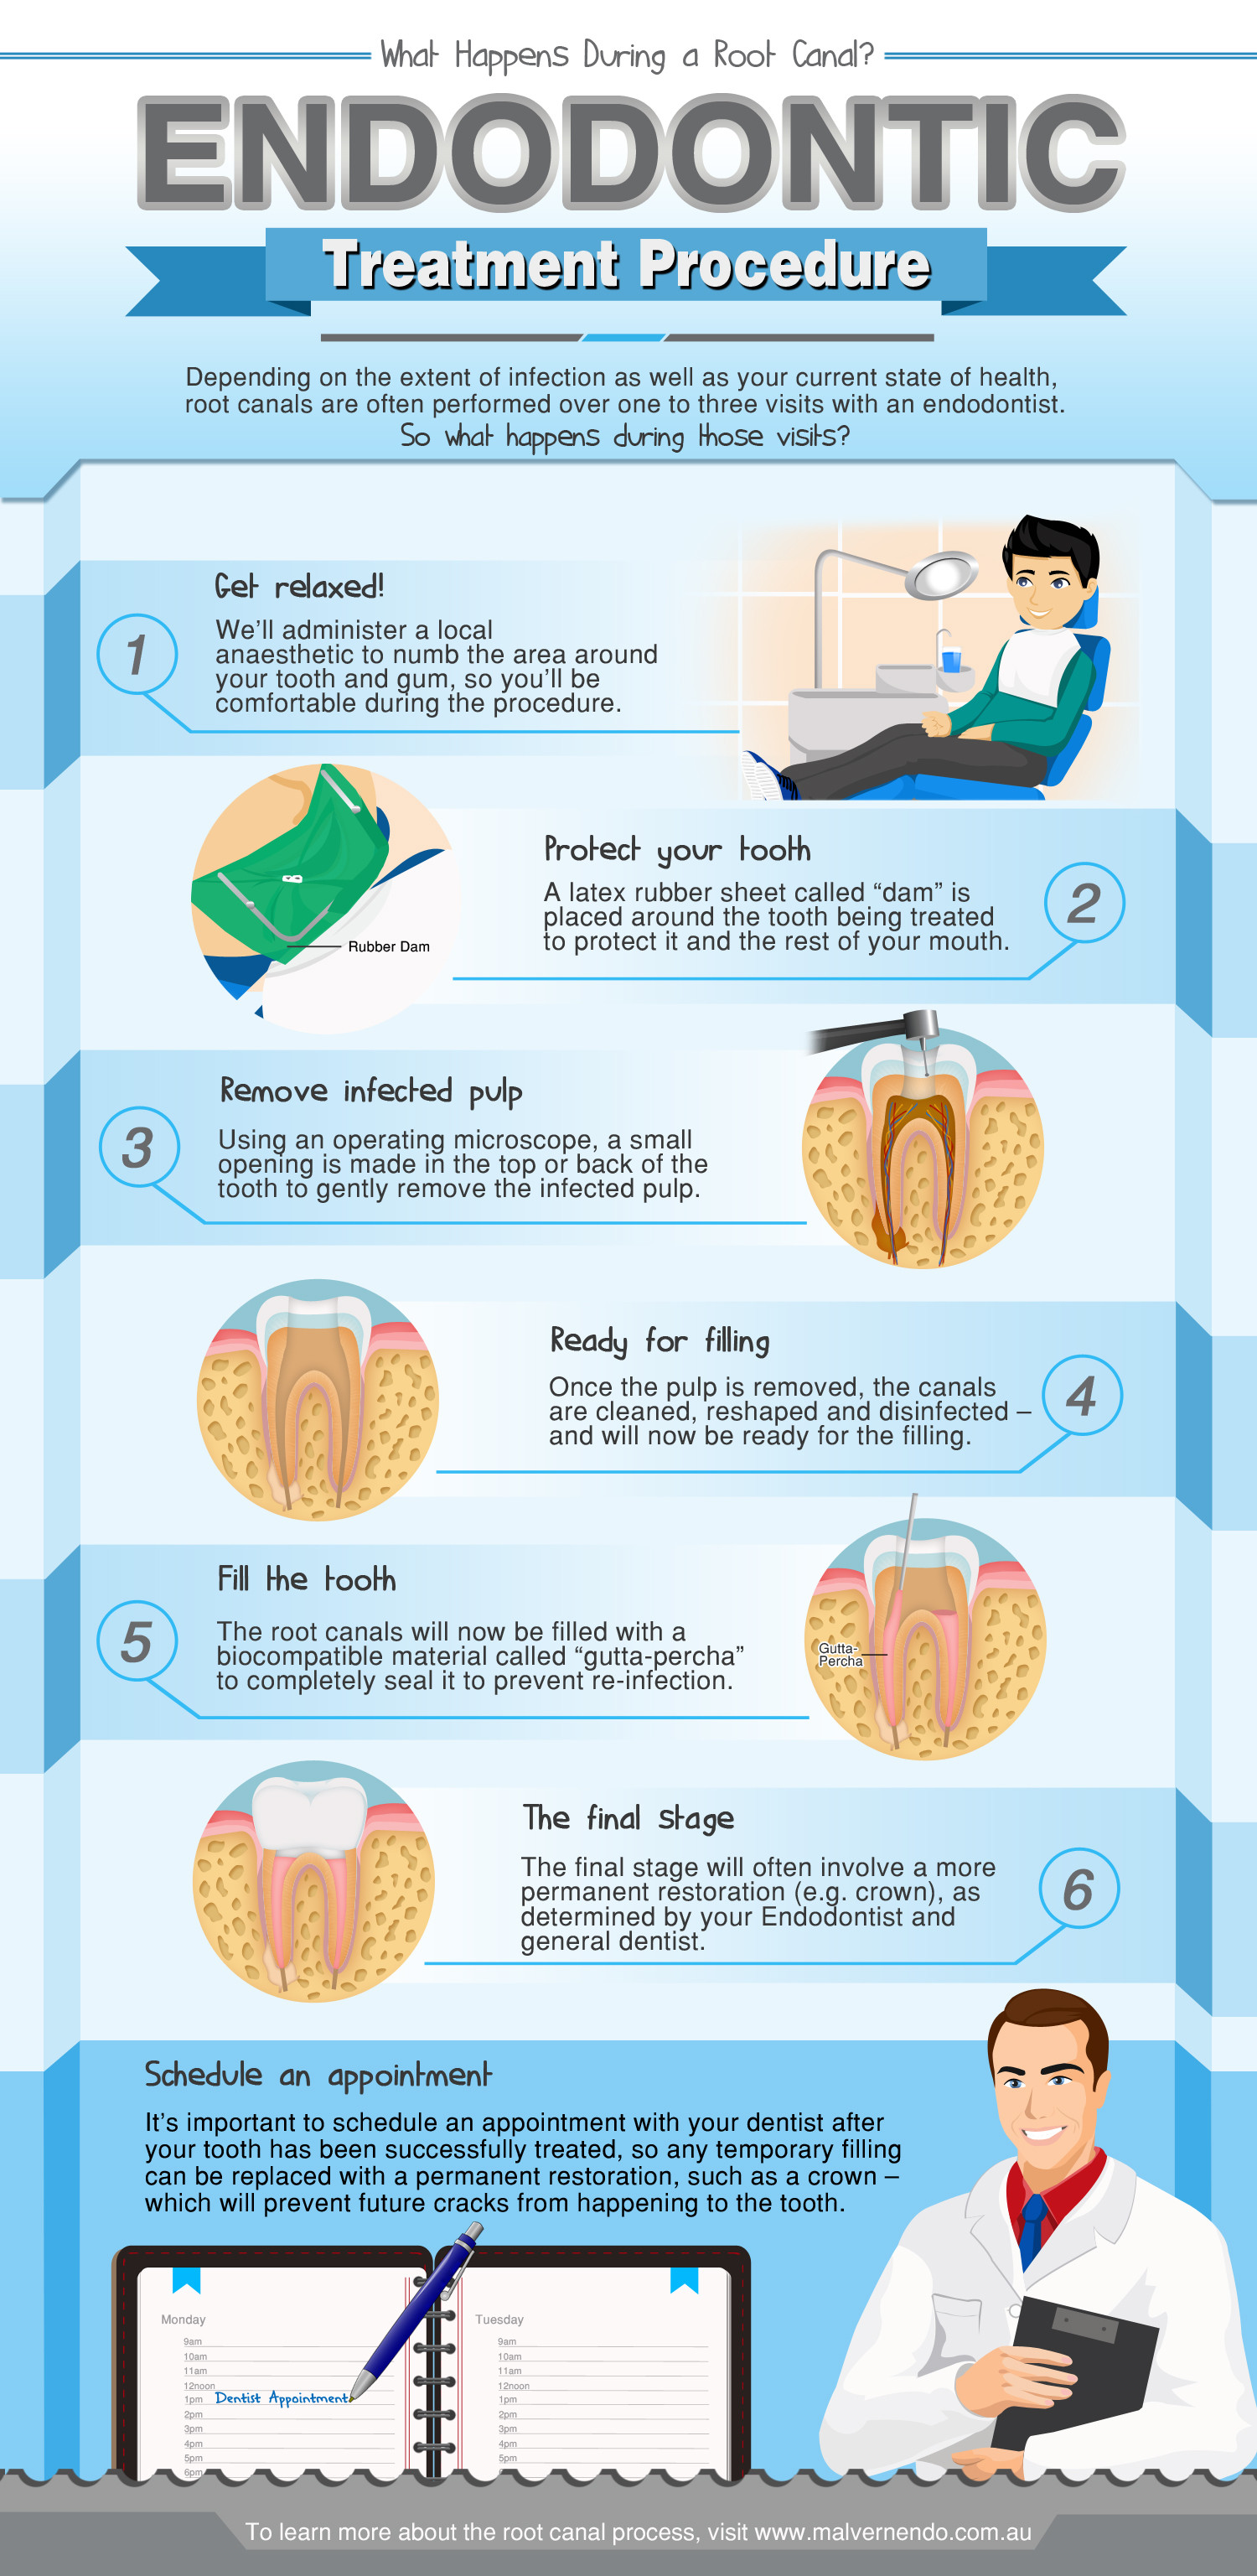 Endodontic Treatment Procedure: What Happens During a Root Canal? Infographic